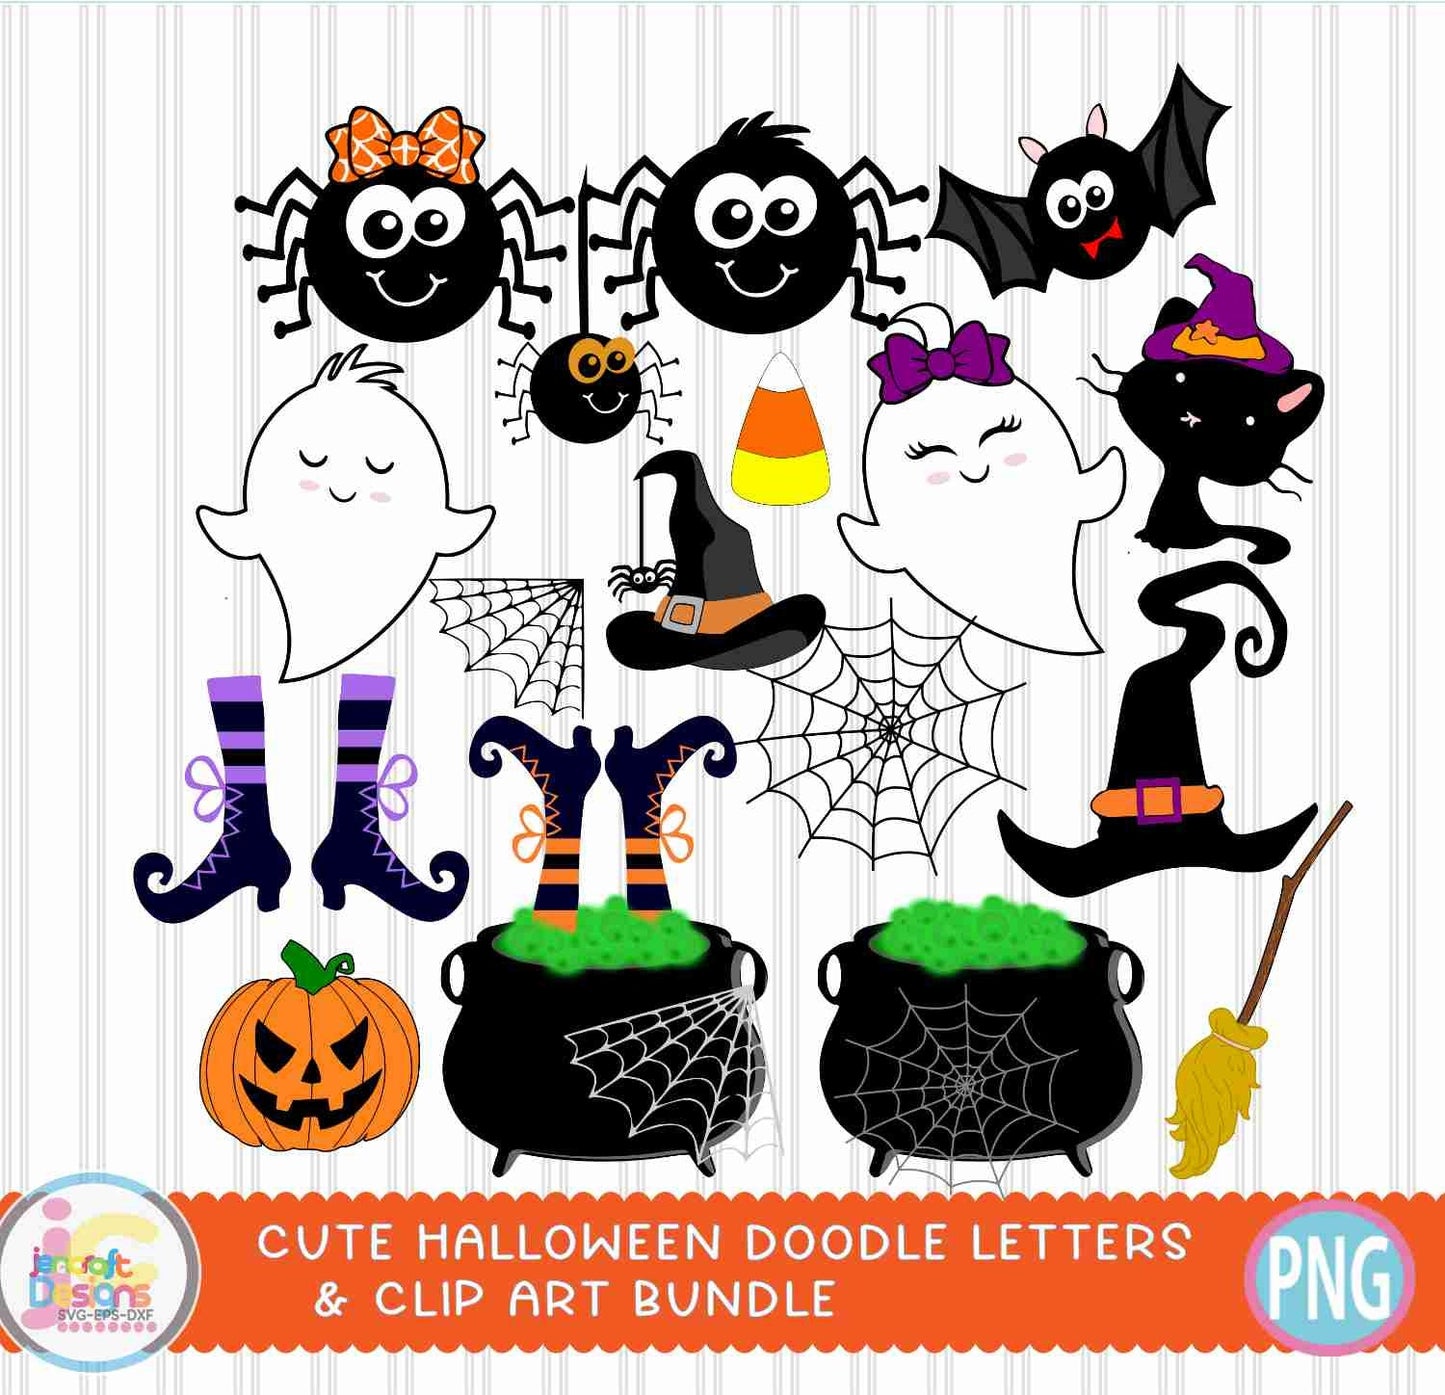 Cute Halloween Doodle Letters Alphabet Png Print File for Sublimation or Printing - JenCraft Designs